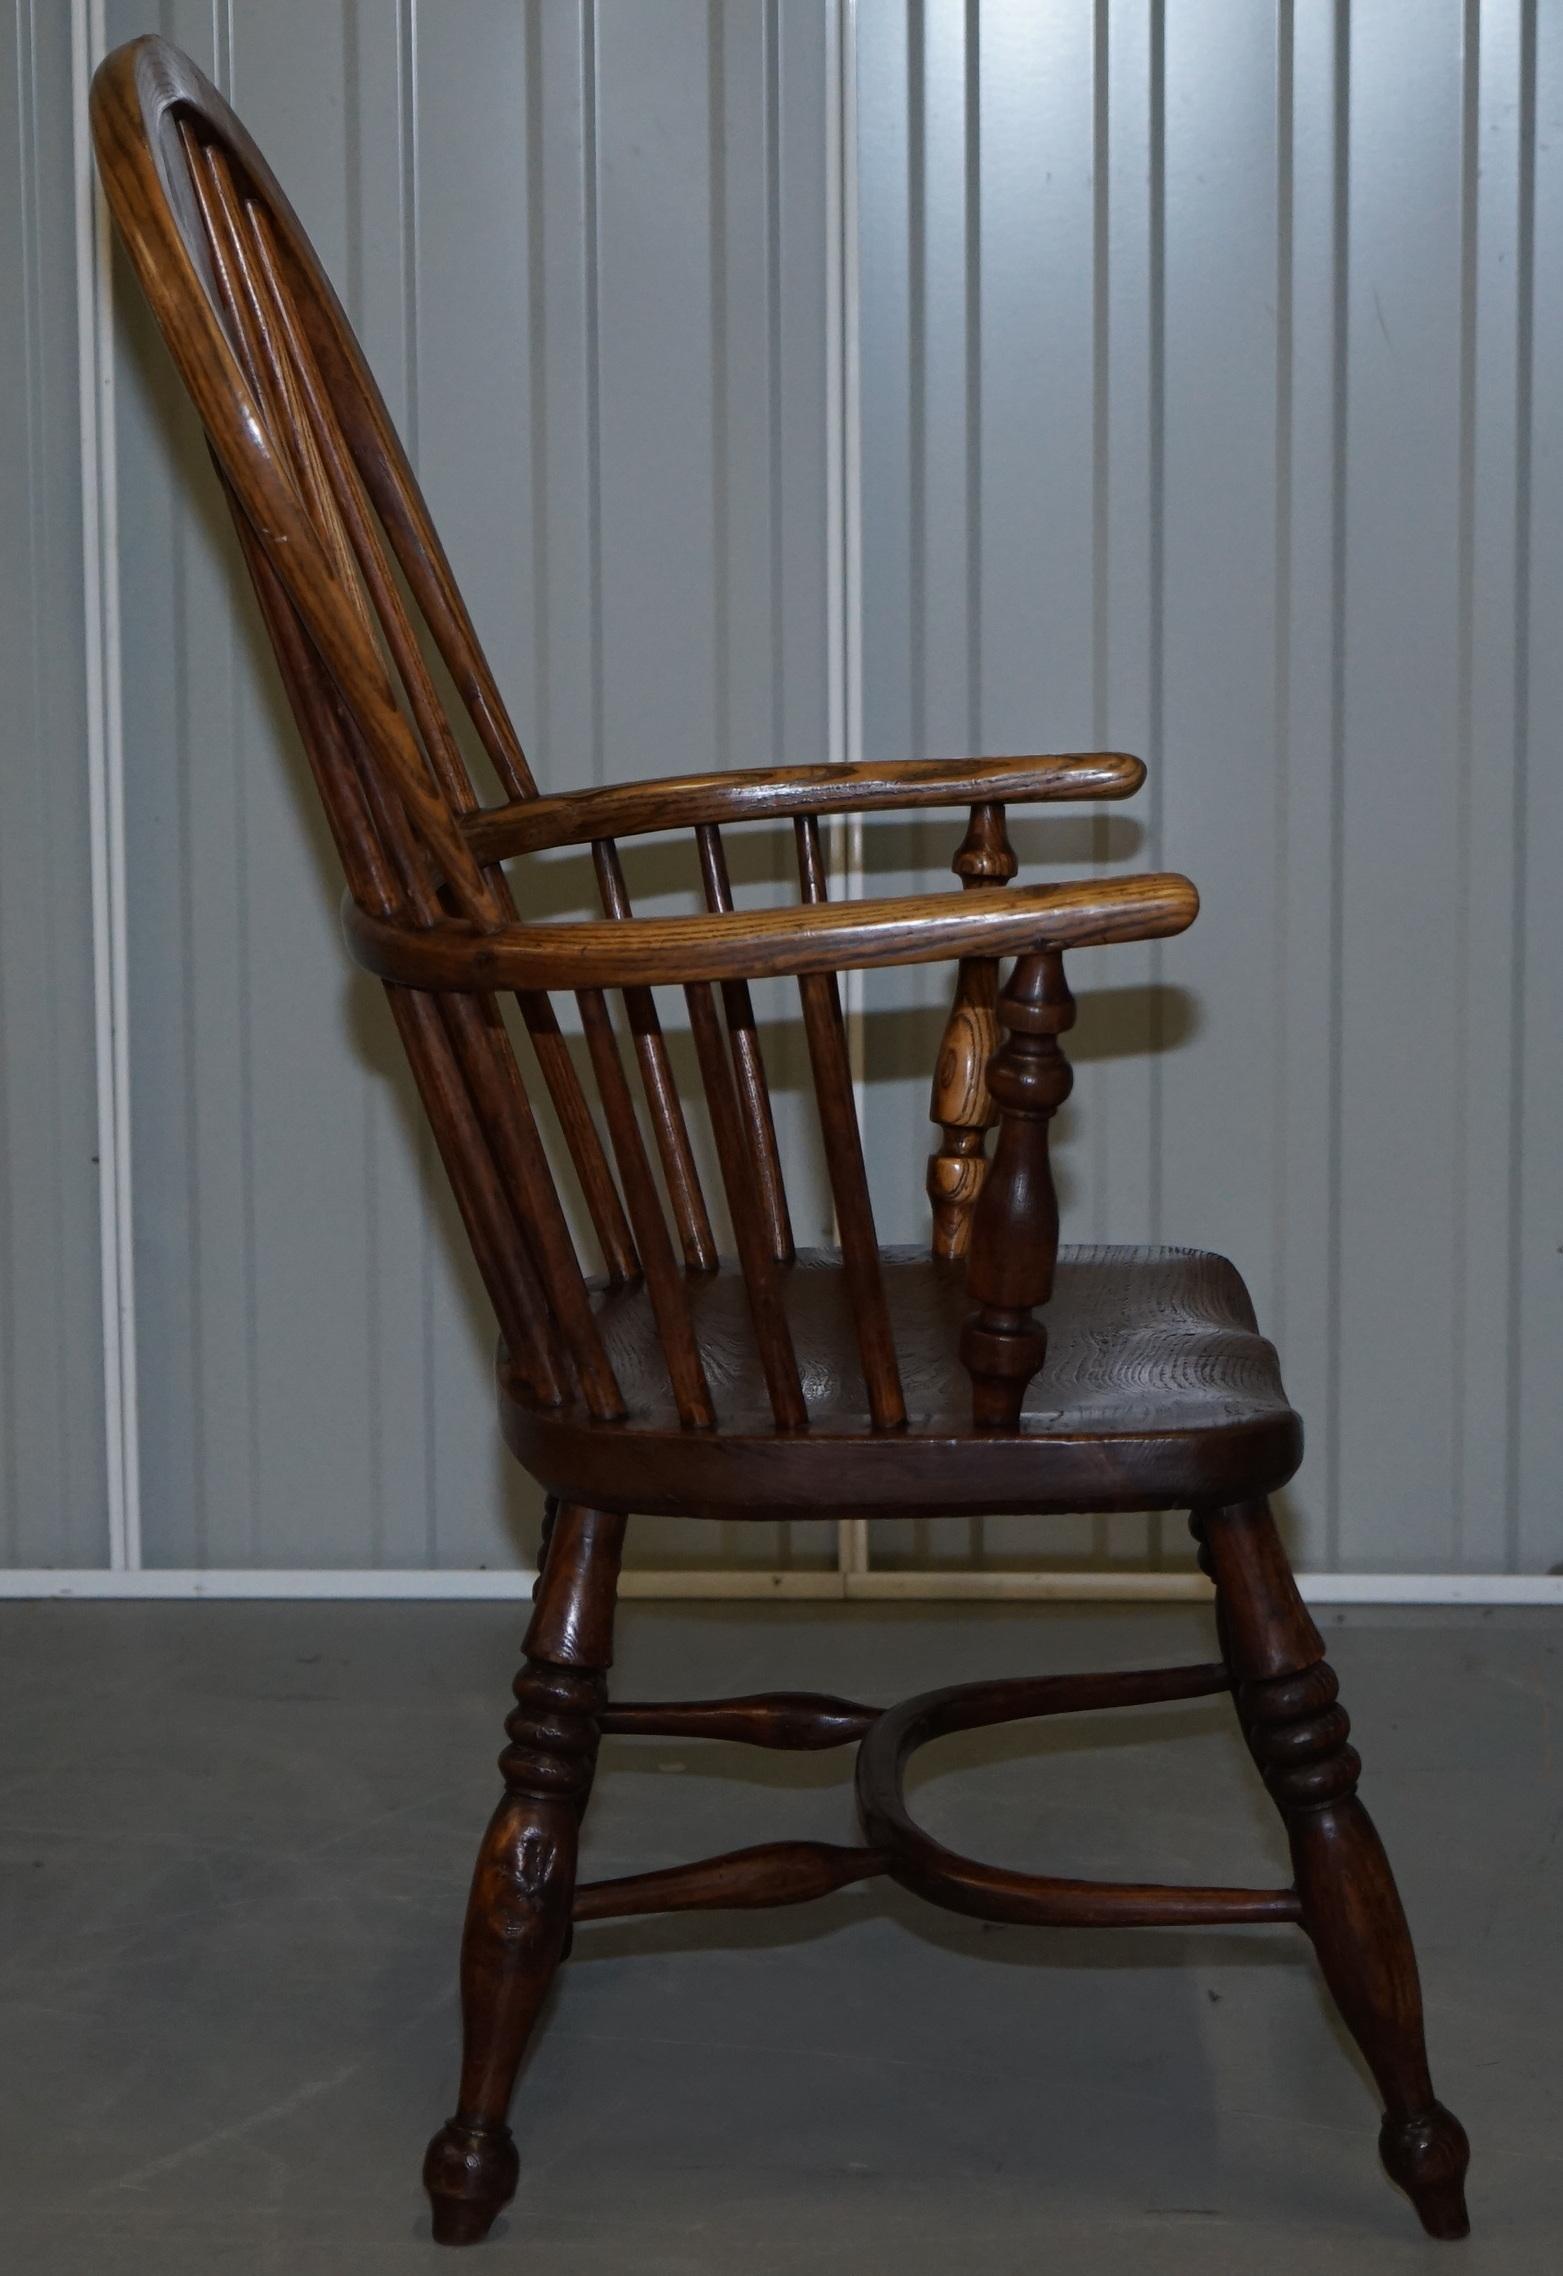 English Classic Antique 19th Century Elm Hoop Back West Country Windsor Armchair For Sale 4